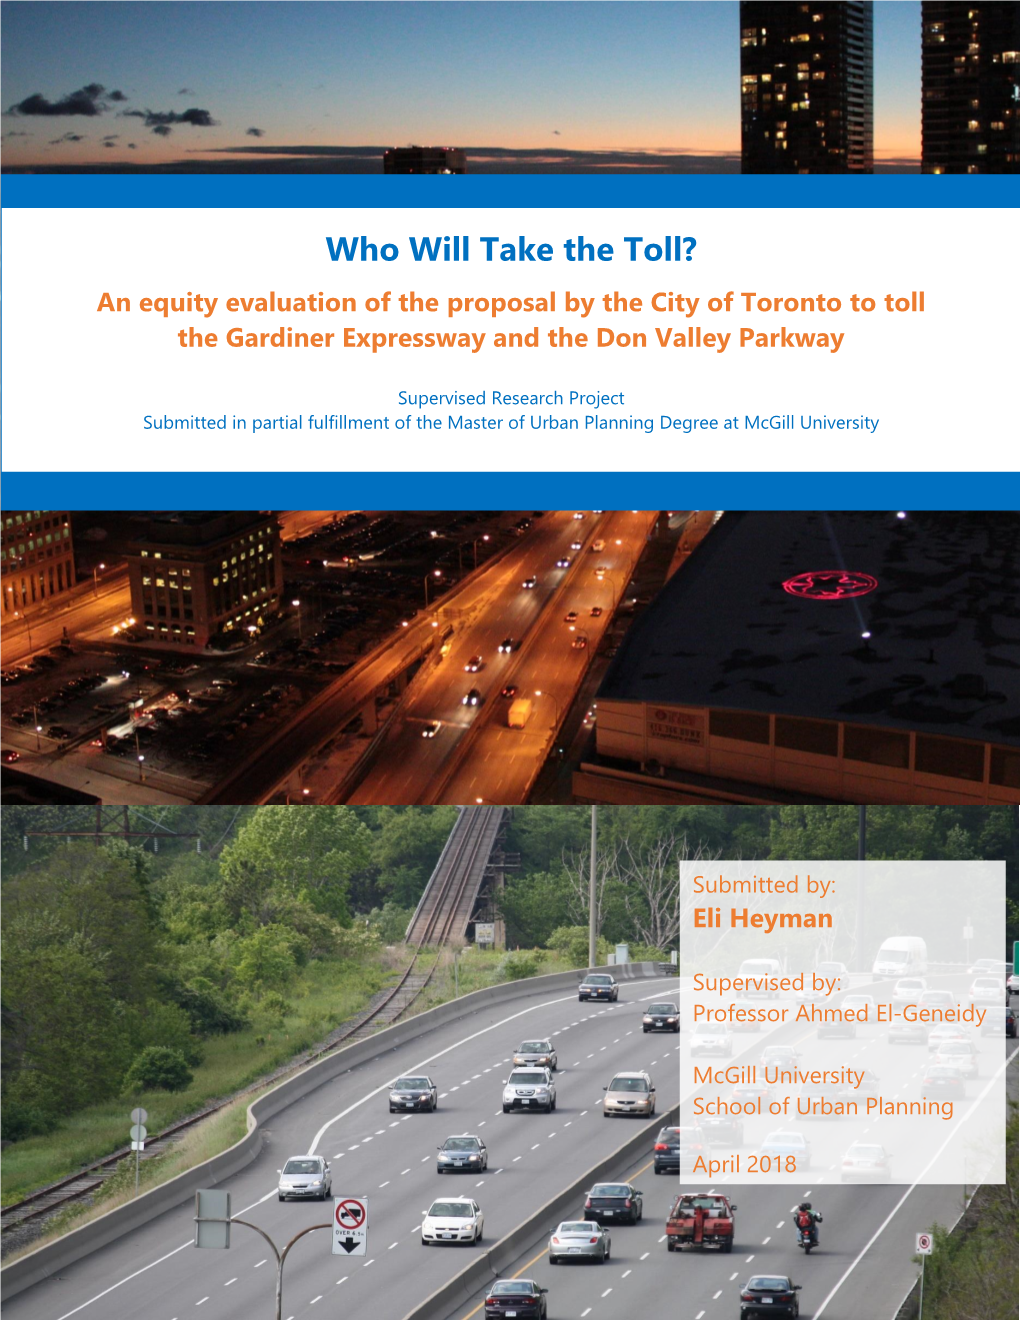 Who Will Take the Toll? an Equity Evaluation of the Proposal by the City of Toronto to Toll the Gardiner Expressway and the Don Valley Parkway